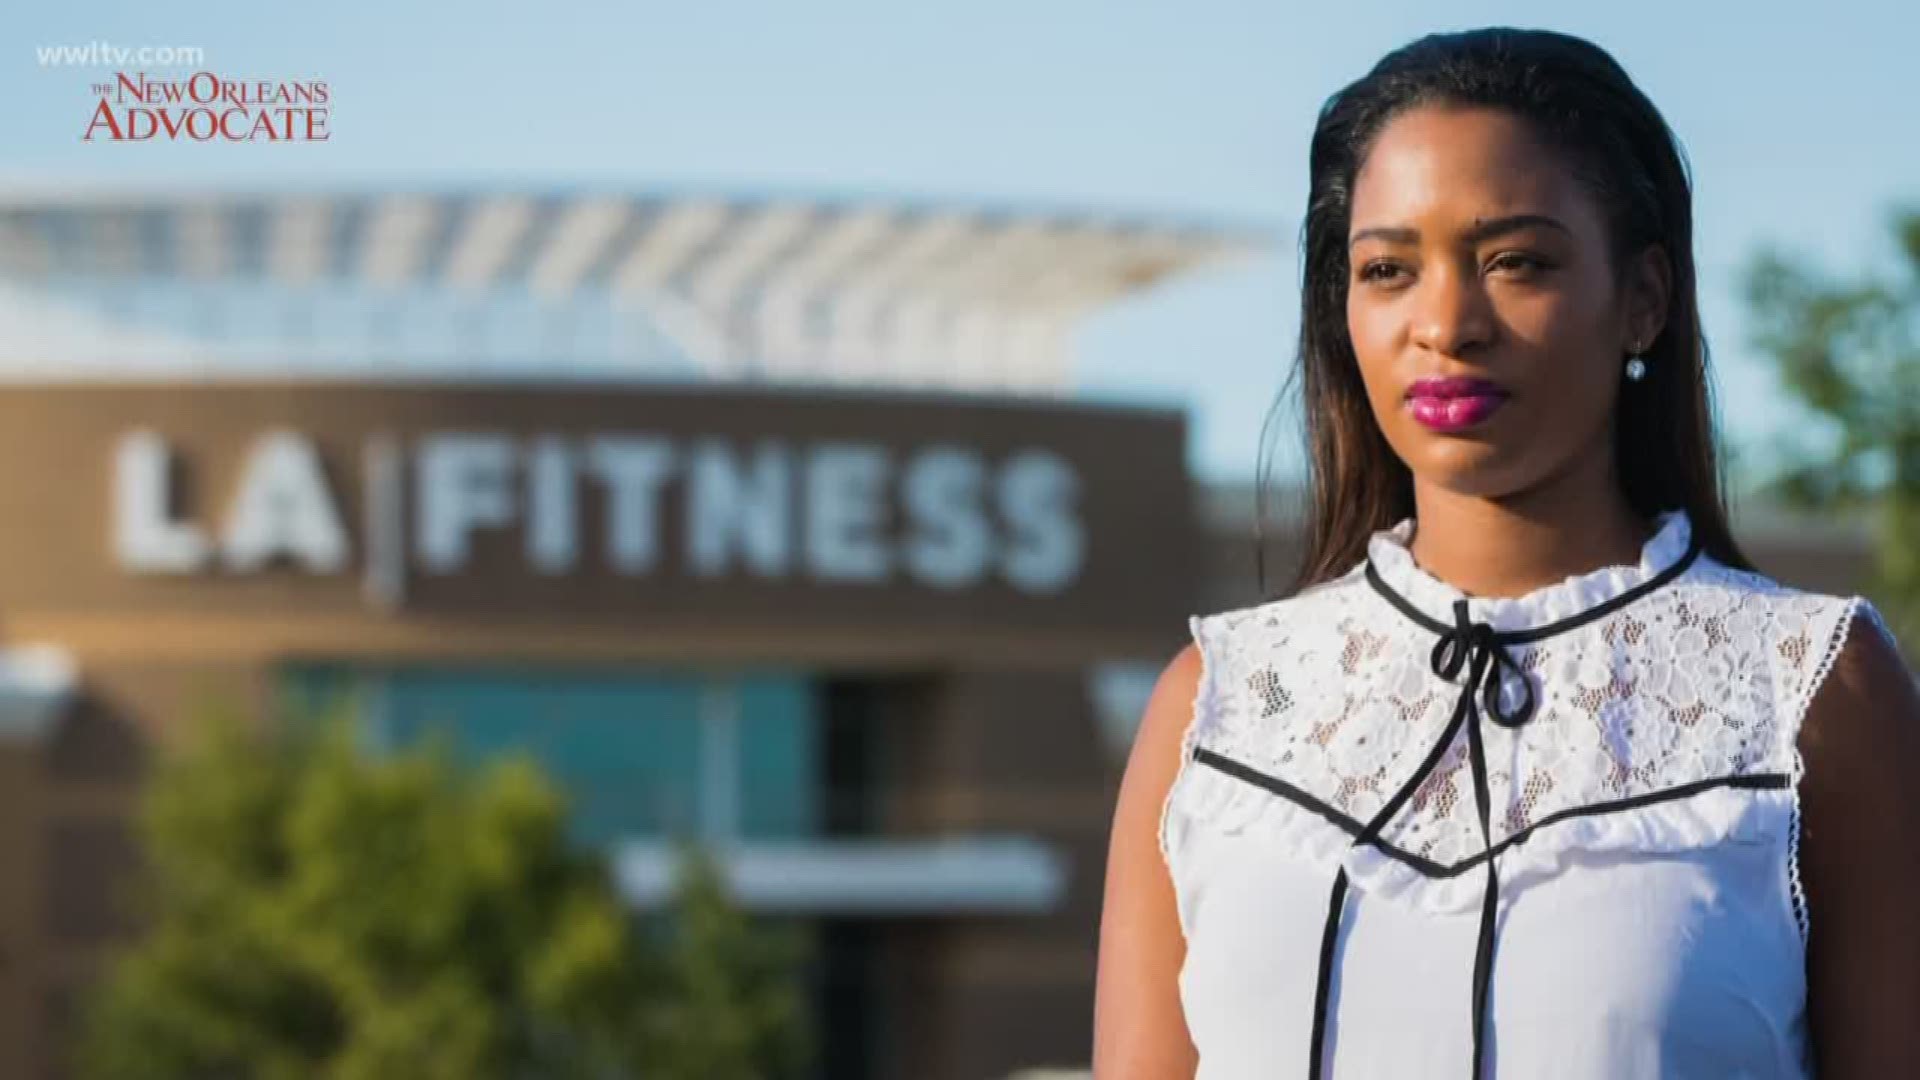 The 26-year-old is preparing to file a lawsuit against LA Fitness alleging racial discrimination after she says she was denied the opportunity to work because of her hair and fired.